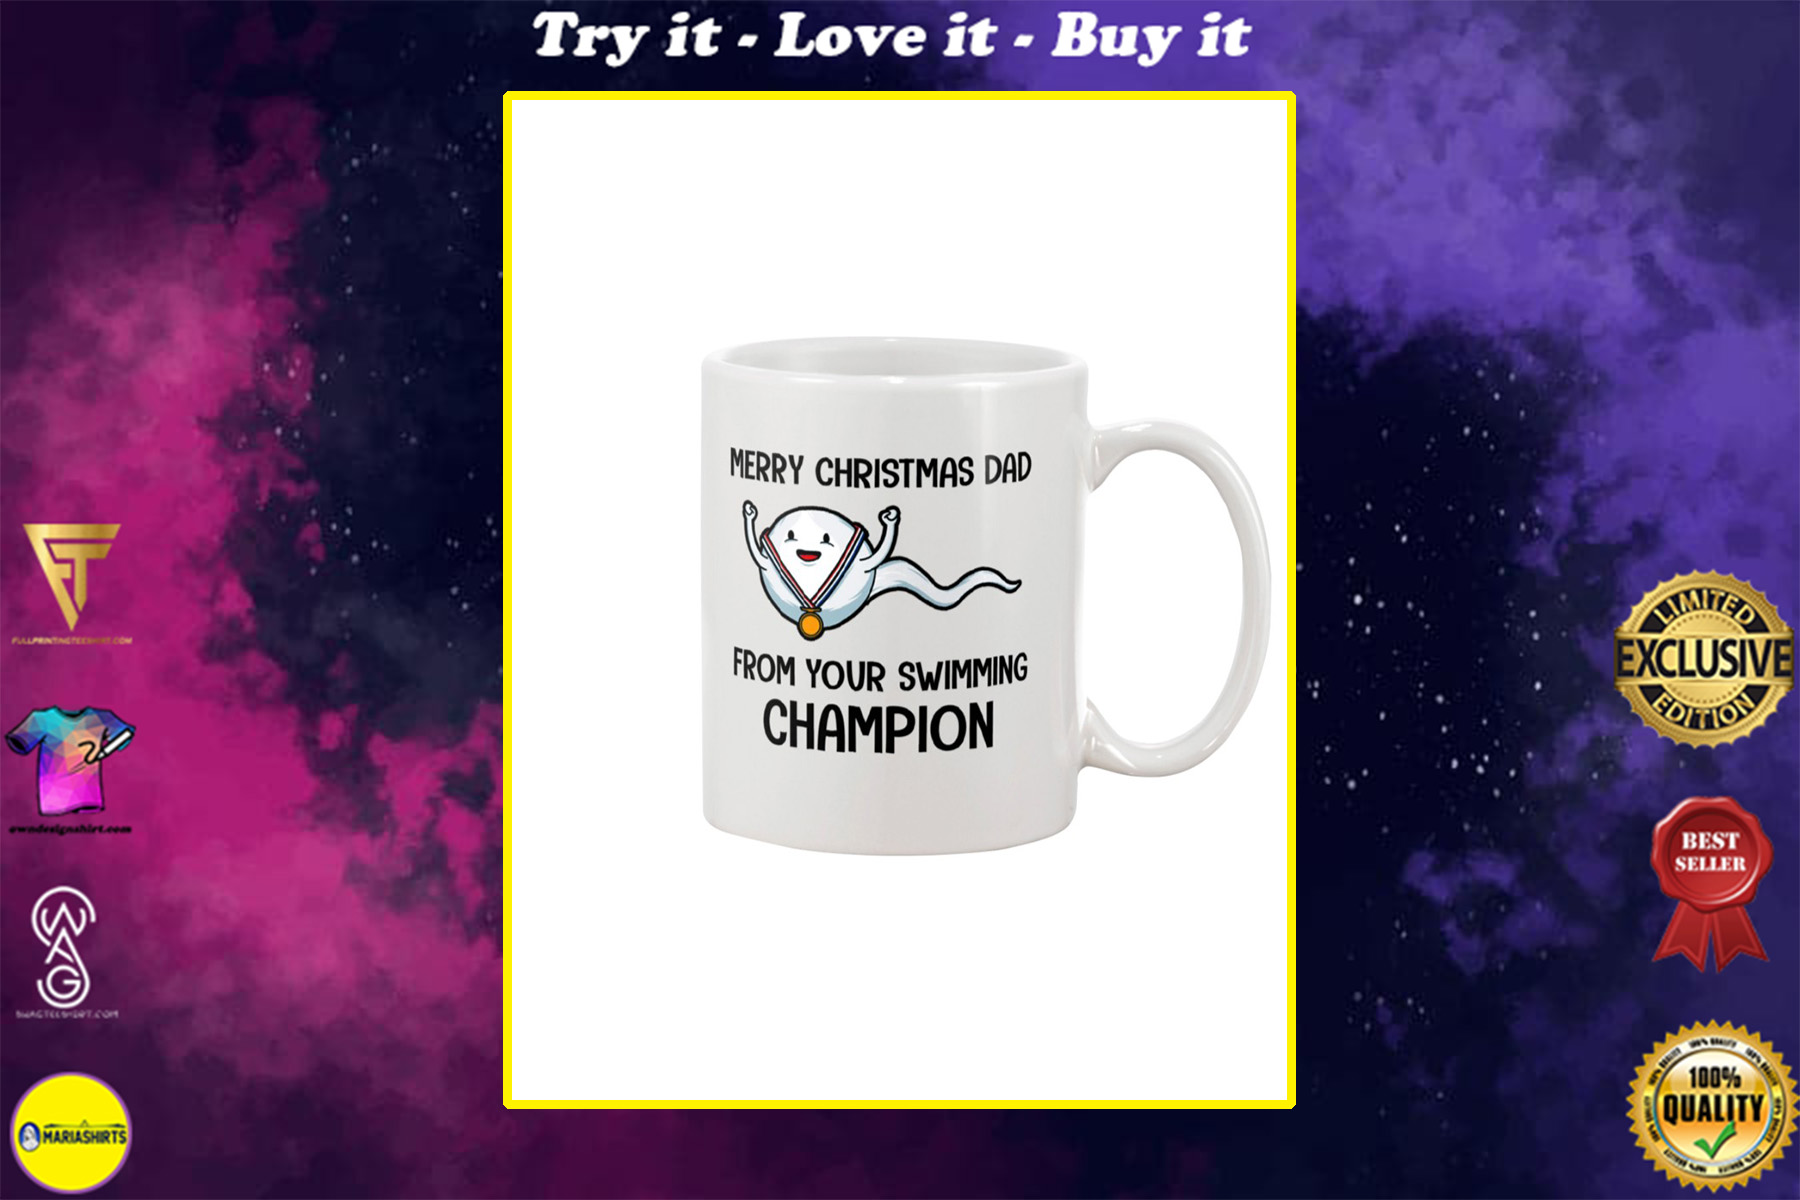 merry christmas dad from your swimming champion mug